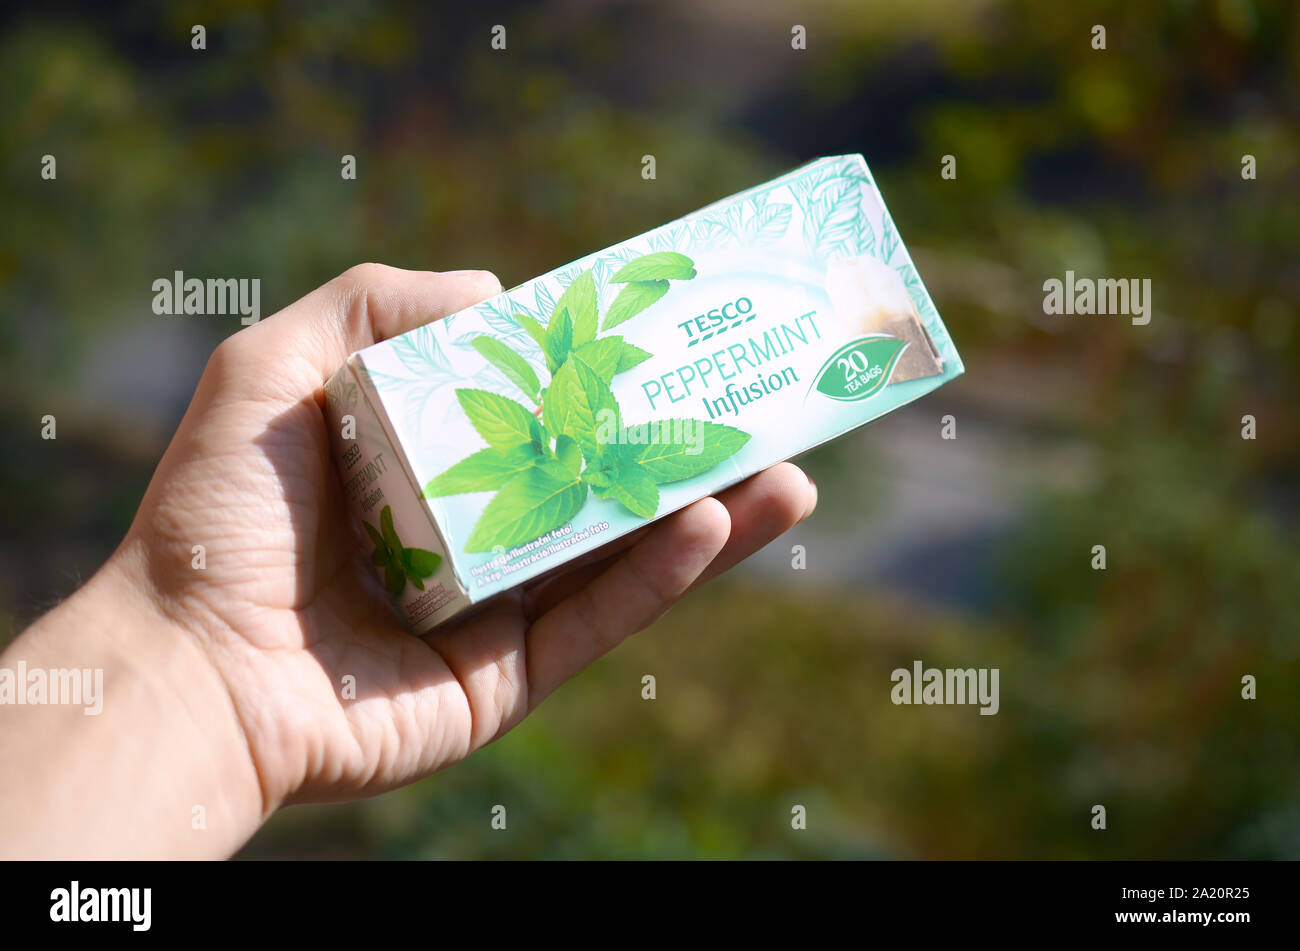 KHARKOV, UKRAINE - SEPTEMBER 23, 2019: Pack shot of peppermint infusion tea of Tesco plc in male hand. Tesco is a British multinational groceries and Stock Photo